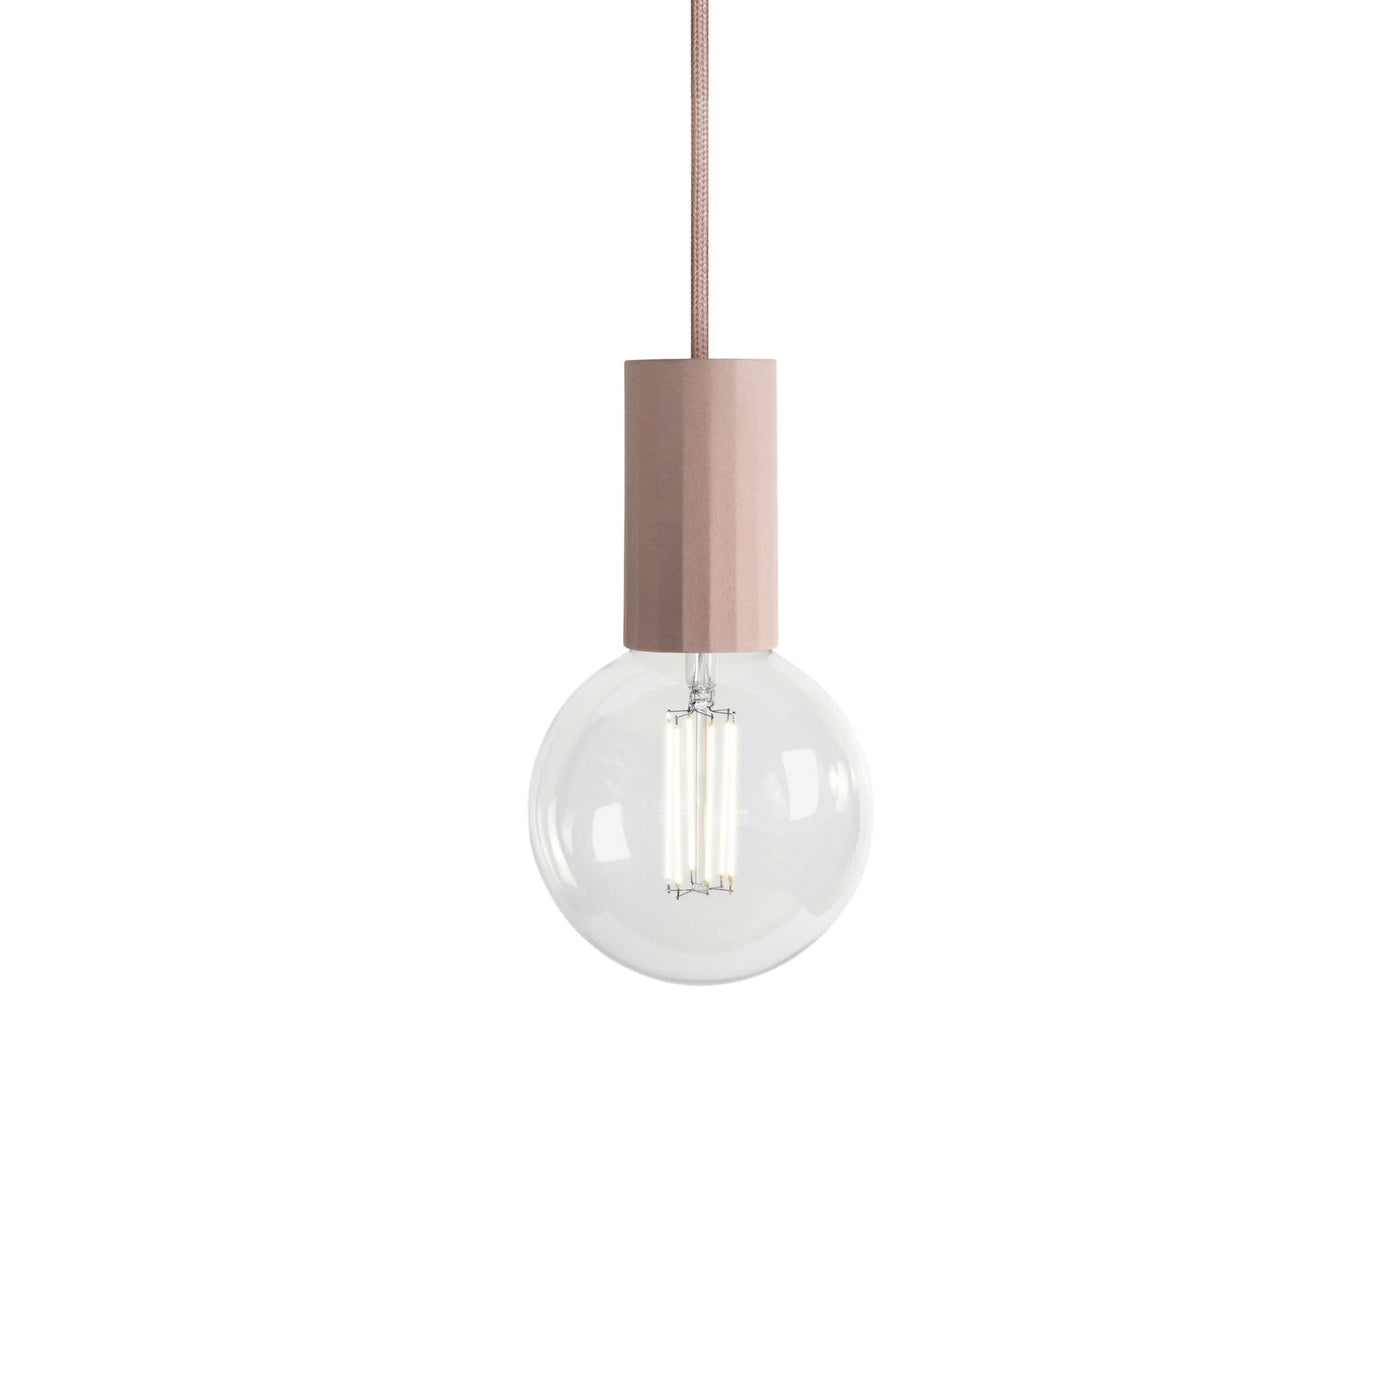 Vitamin x someday designs case pendant lamp in blush pink, available from someday designs   #colour_blush